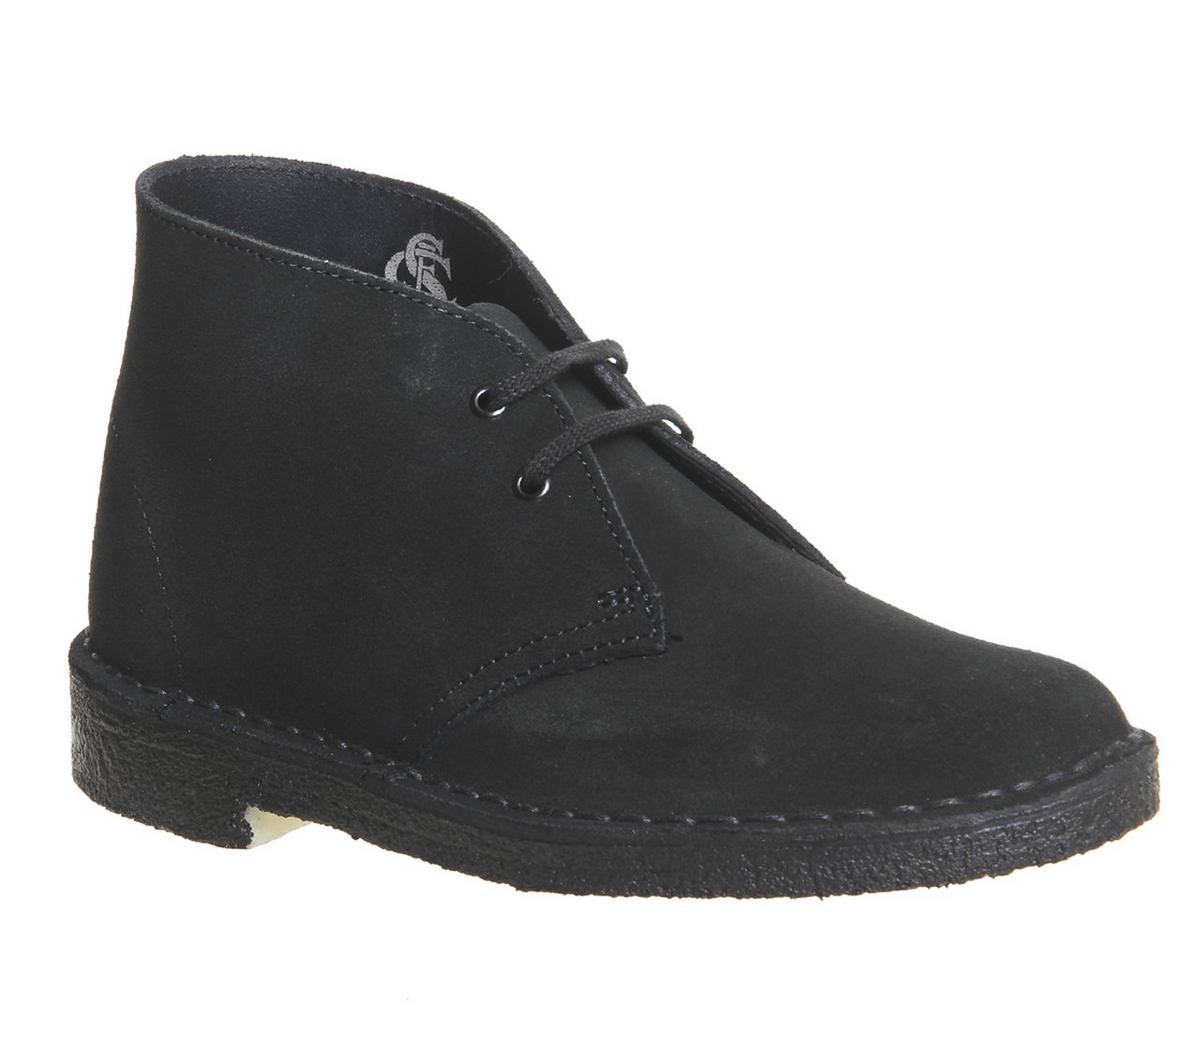 Womens Clarks Desert Boot Black Suede Offcuts Shoes By Office